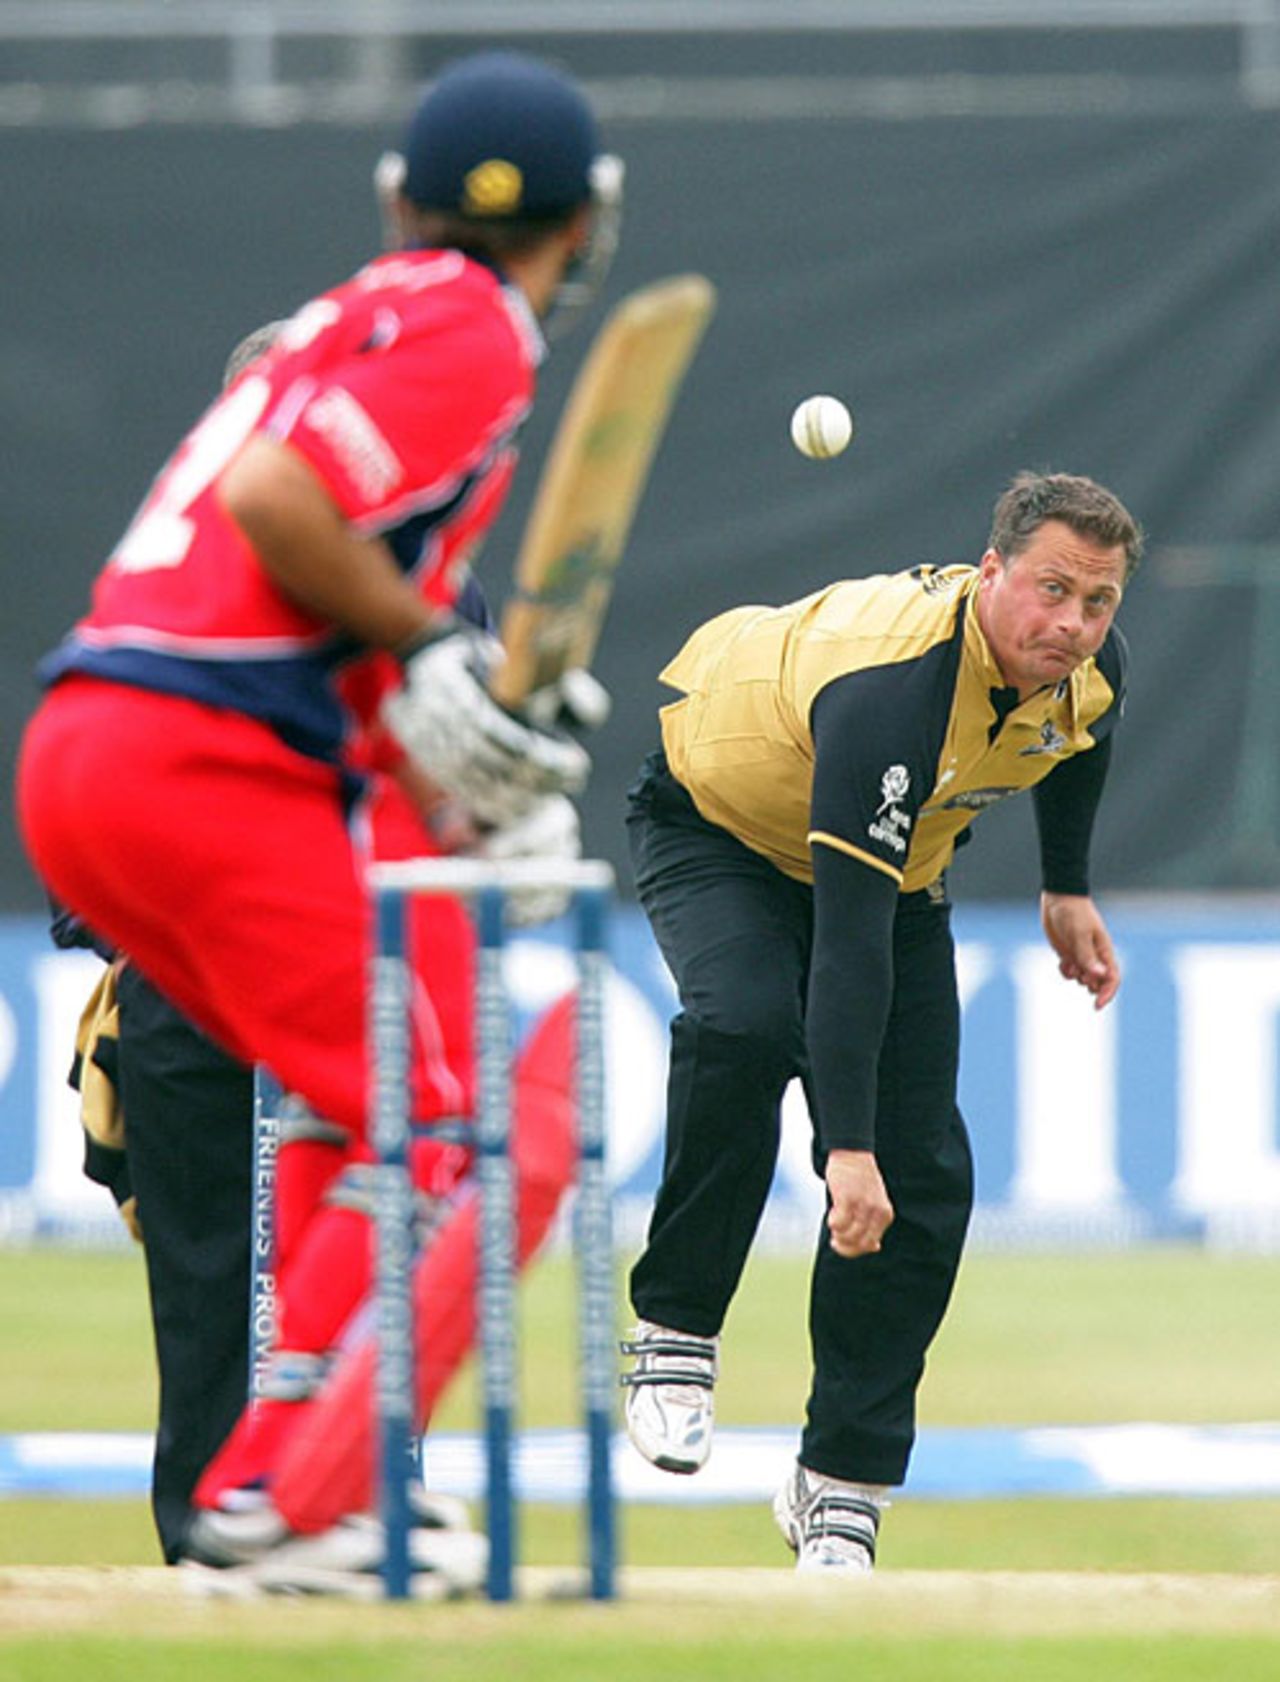 Darren Gough on his way to 3 for 17, Lancashire v Yorkshire, FP Trophy, Leeds, May 28, 2008